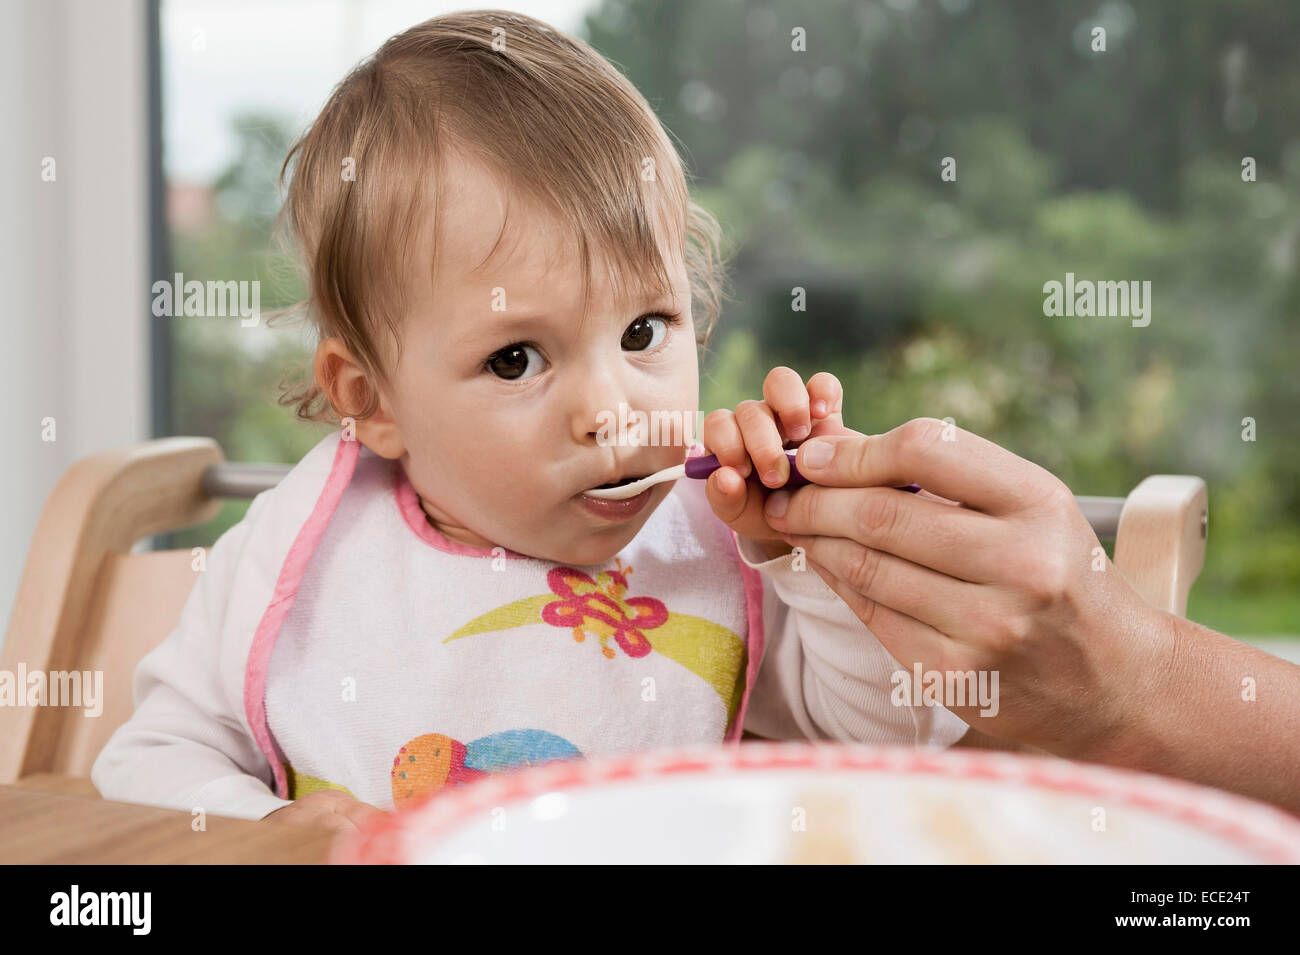 Portrait 1 year old baby girl spoon eating Stock Photo